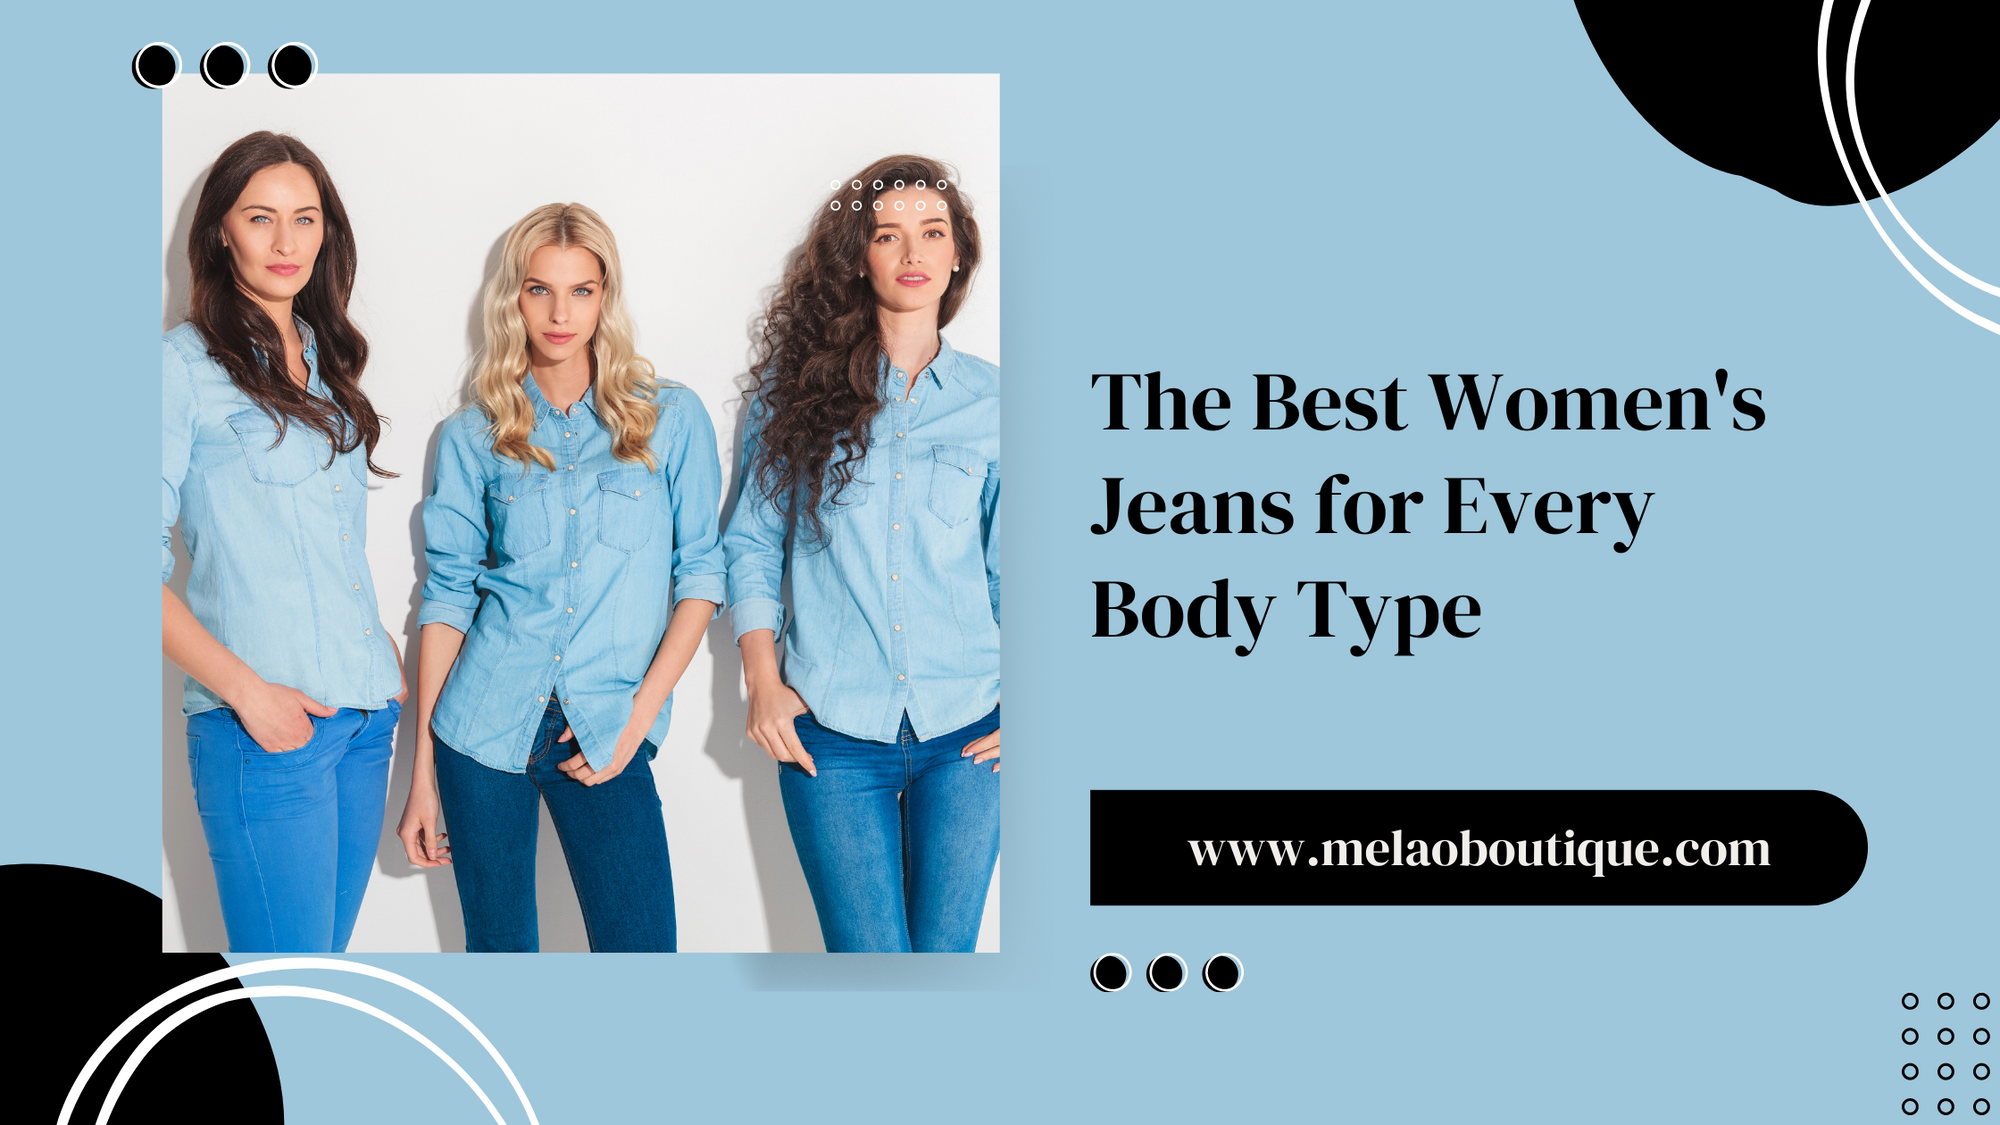 The Best Women's Jeans for Every Body Type